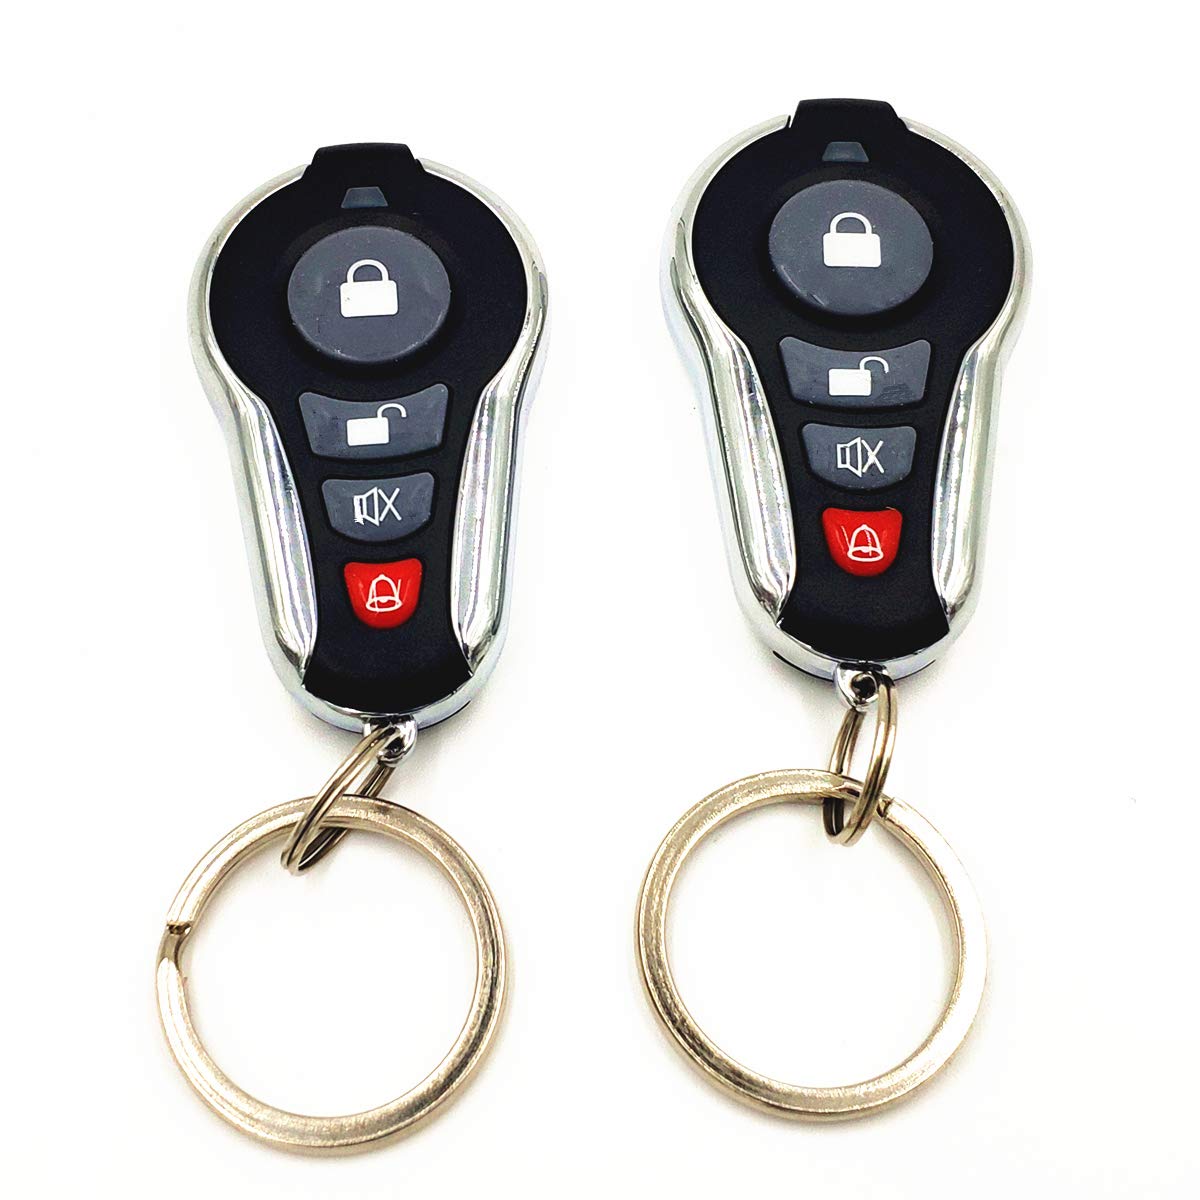 CarBest L232 3-Channel 1-Way Car Alarm Vehicle Security Keyless Entry System